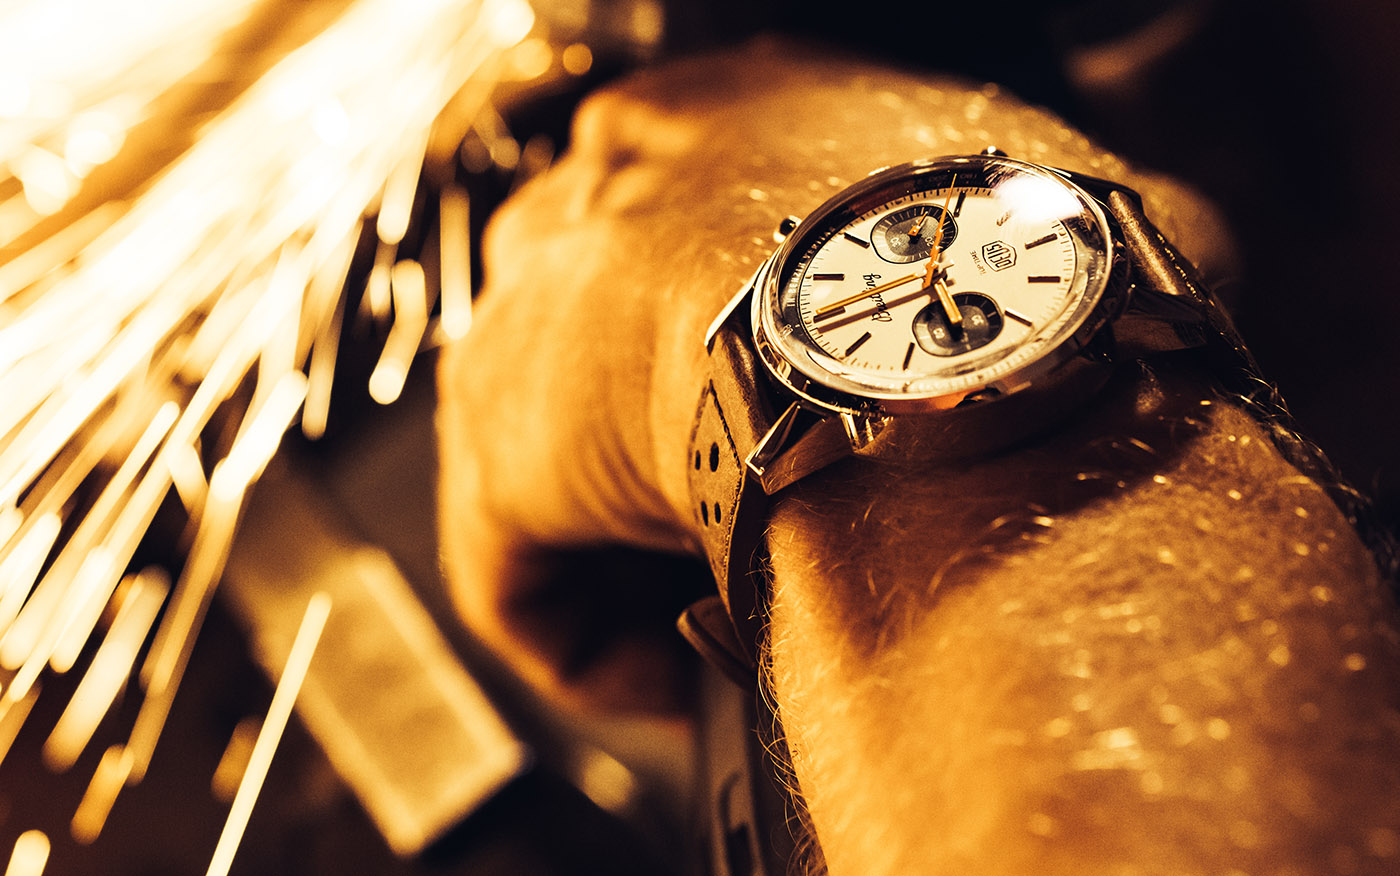 Breitling Top Time Deus Limited Edition – The Watch Pages